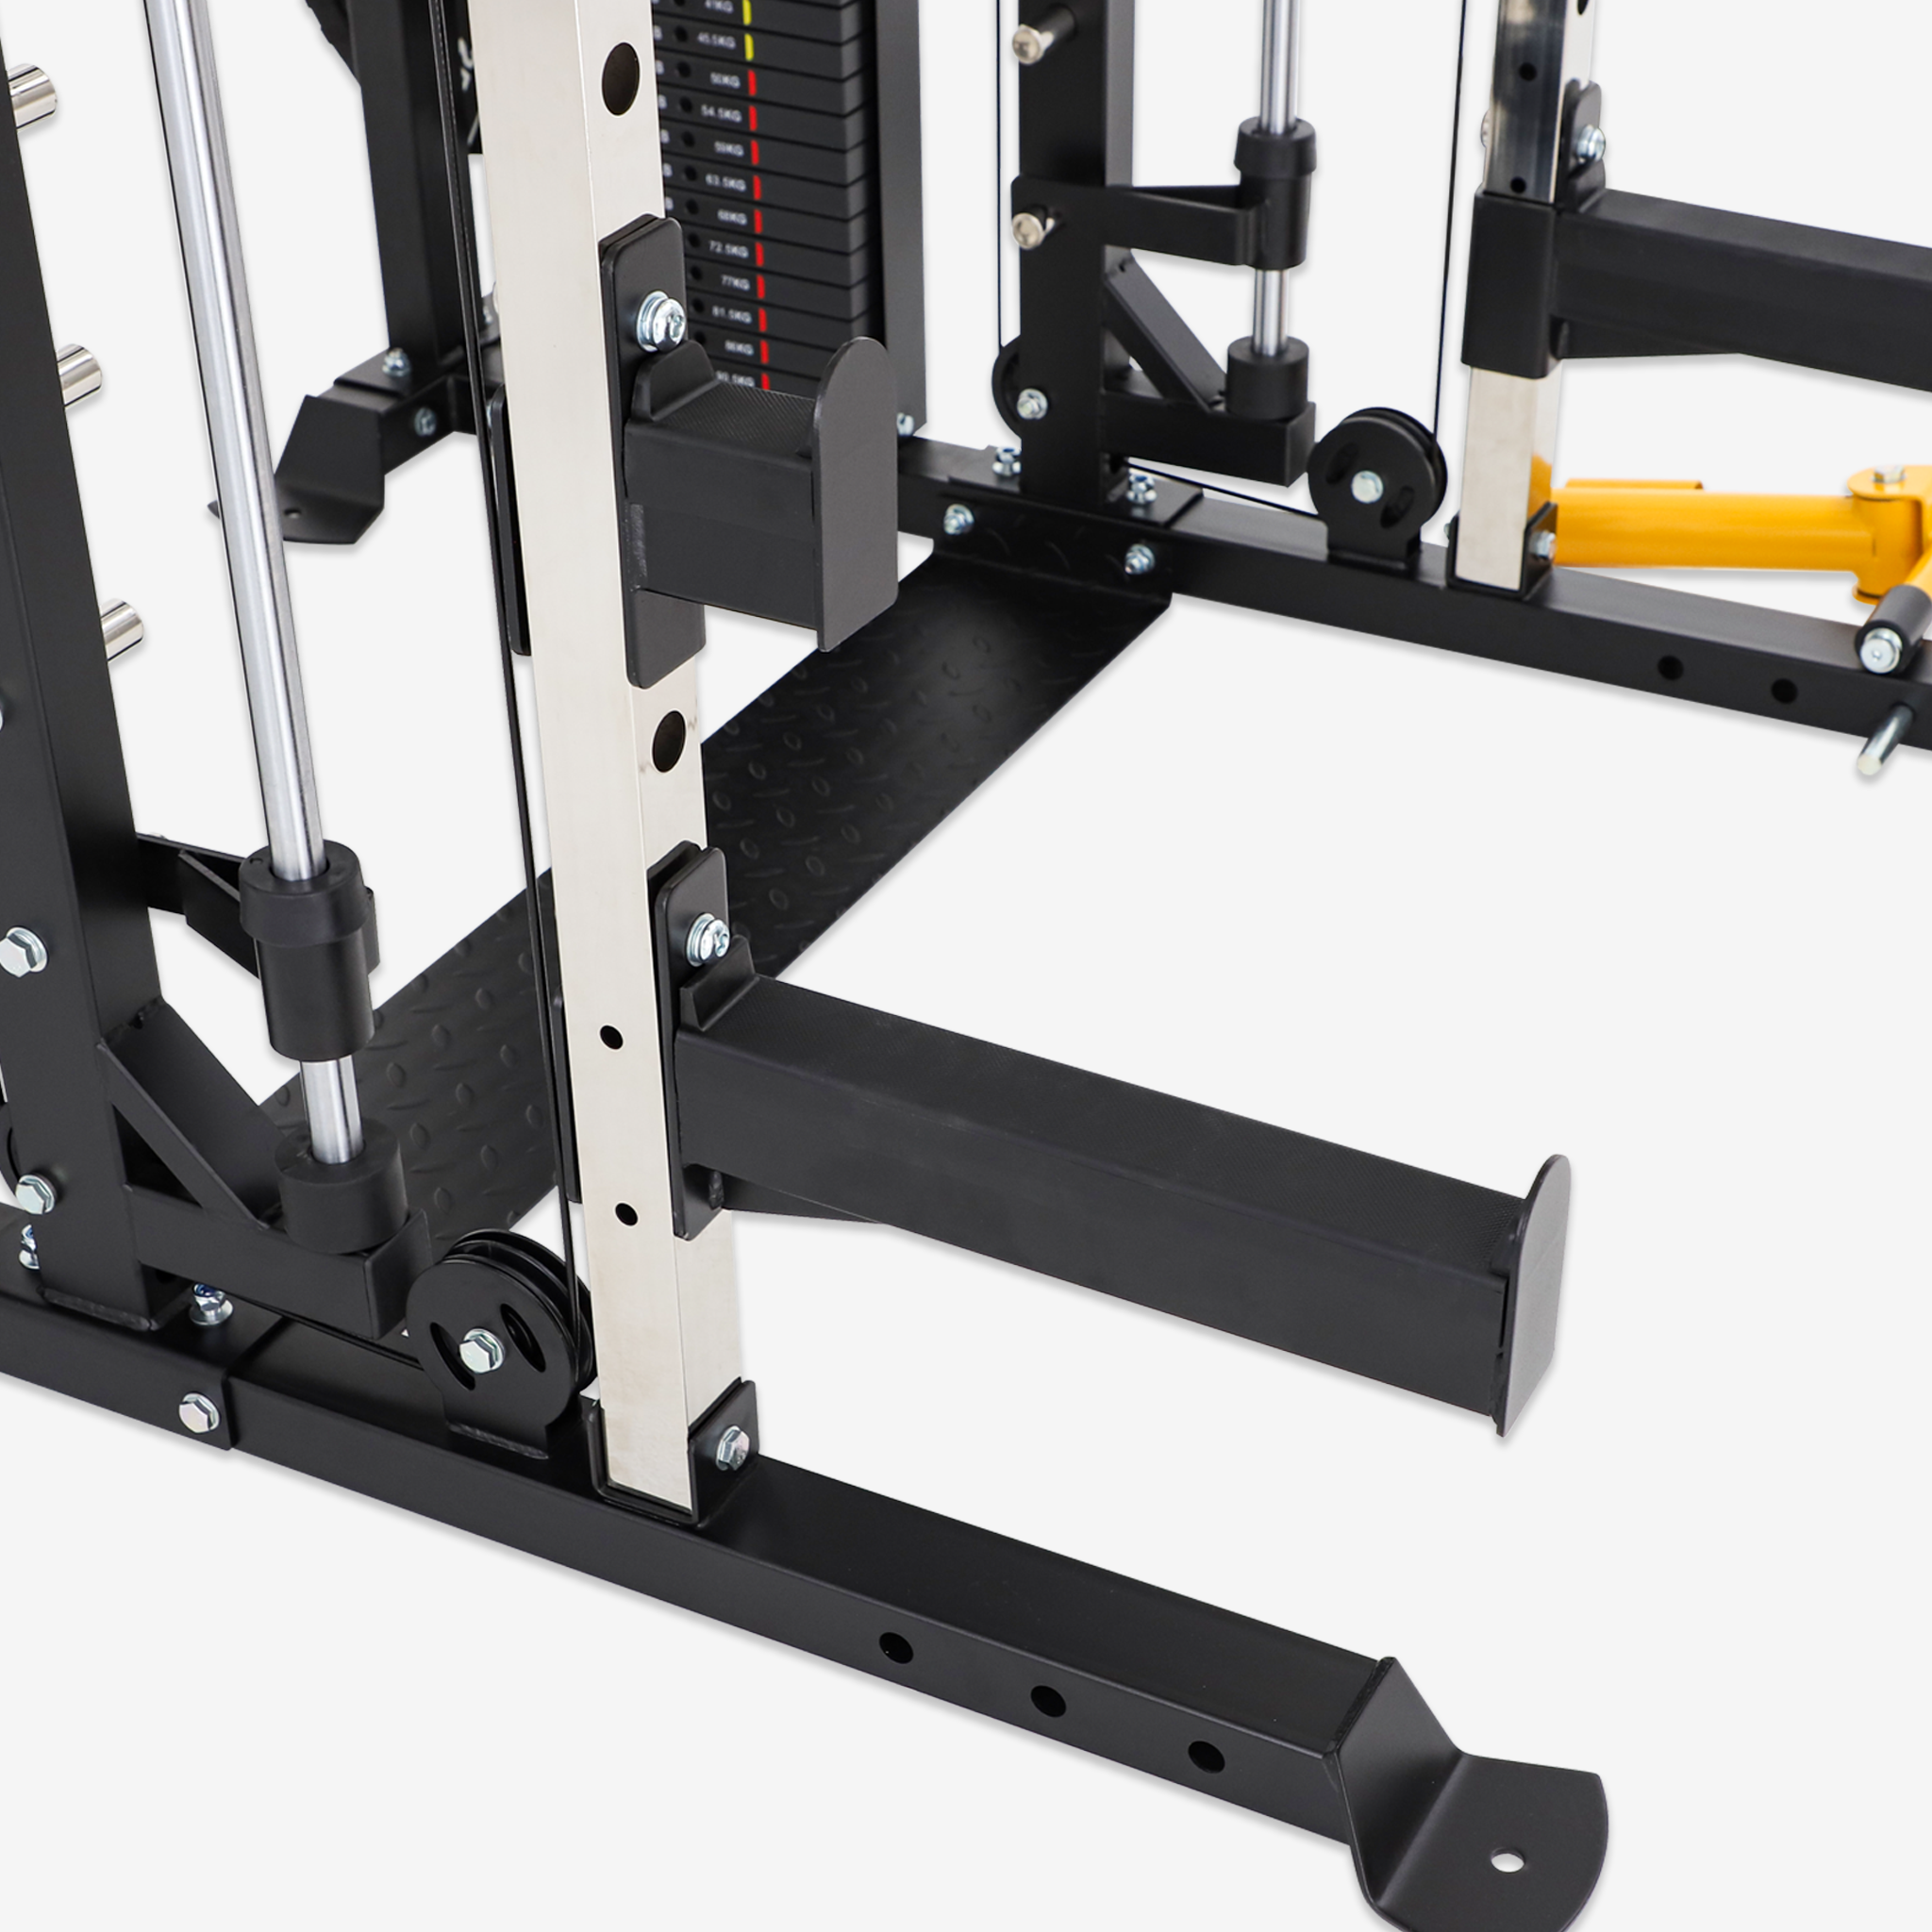 Altas Strength Smith Machine Smith Machine Pin-loaded Weights Stack Strength Trainer Home Gym with Pulley System AL-3087B(Pre-order)